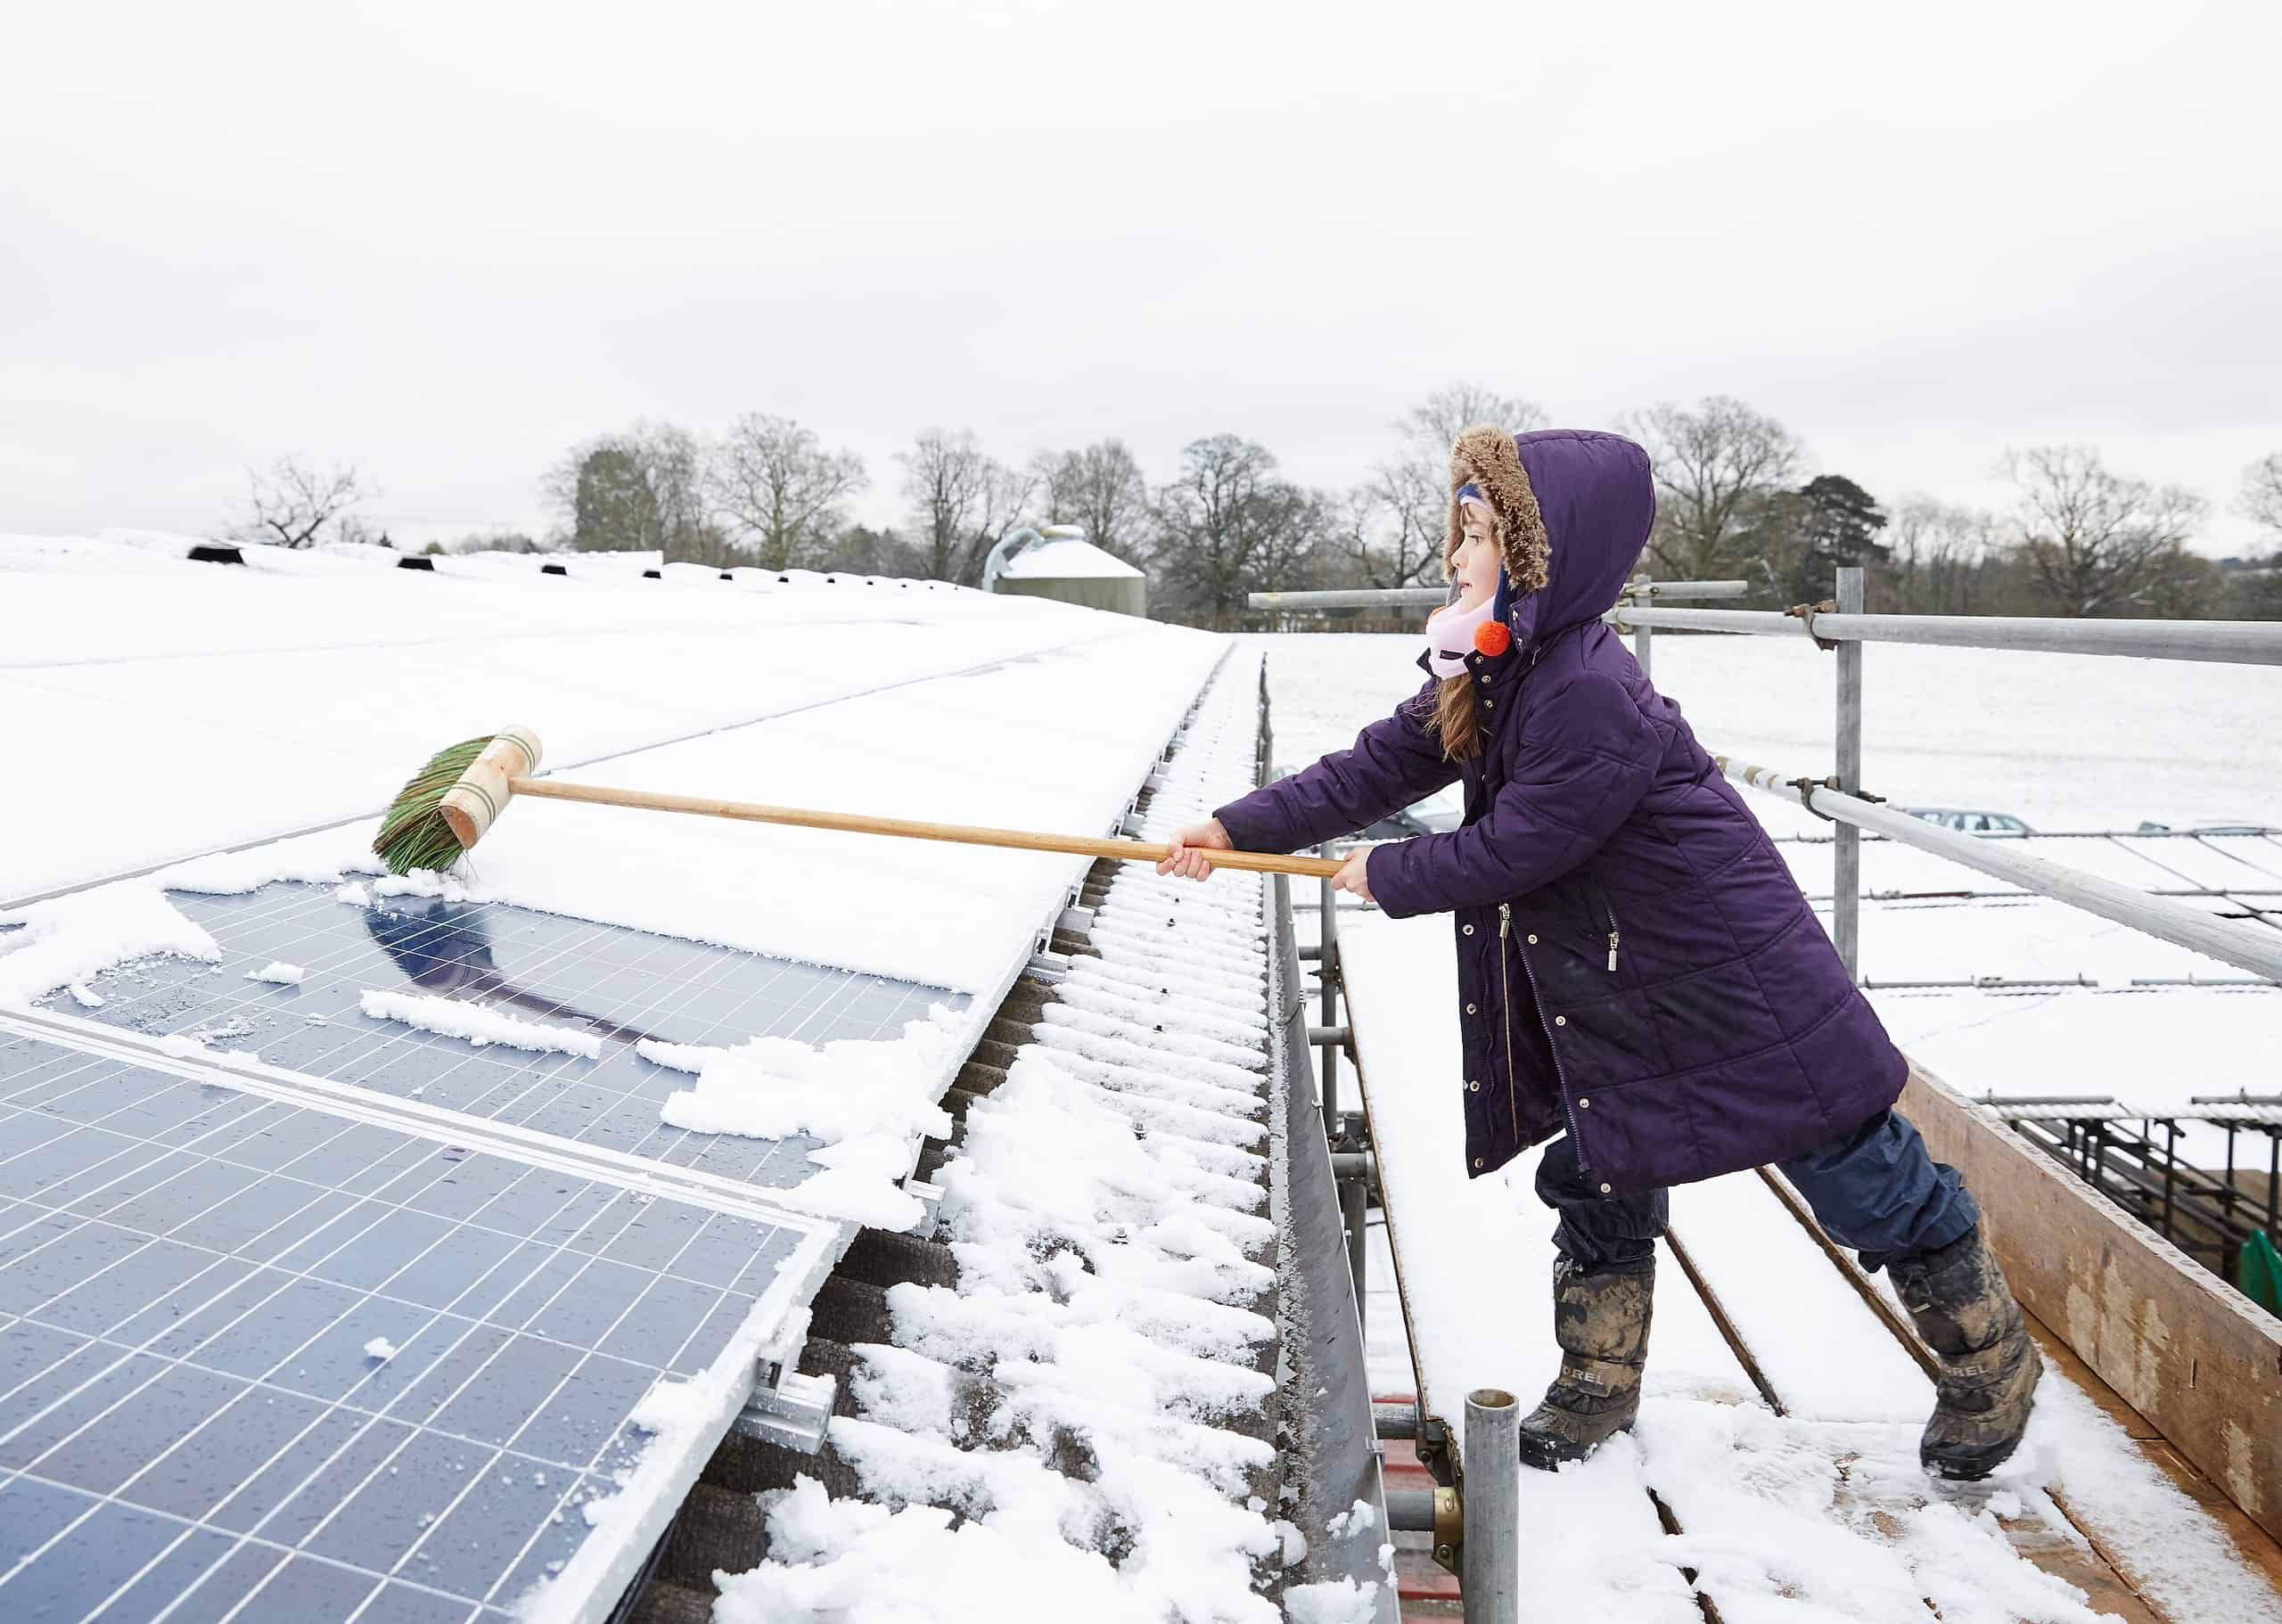 Young girl cleaning photovoltaic solar panels from snow (image: 1010 Climate Action via Wikimedia Commons)